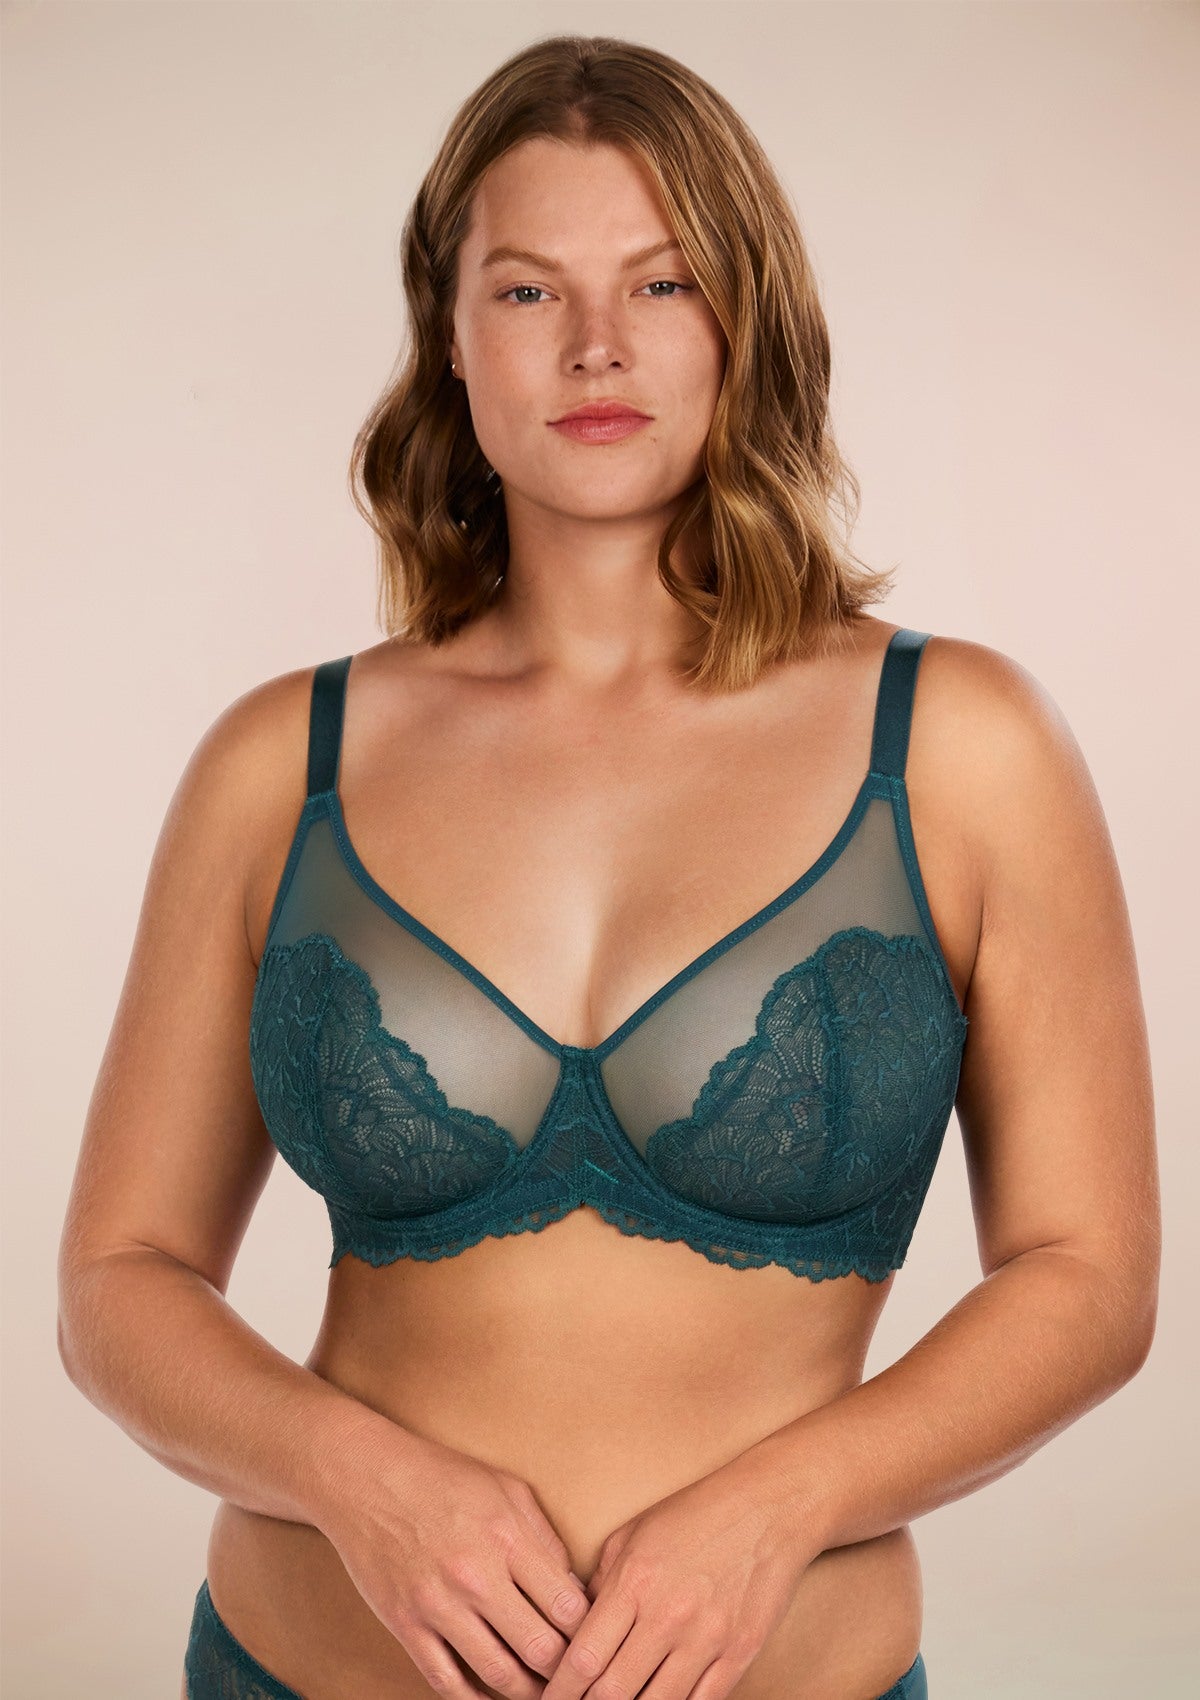 HSIA Blossom Full Figure See-Through Lace Bra For Side And Back Fat - Balsam Blue / 38 / DDD/F